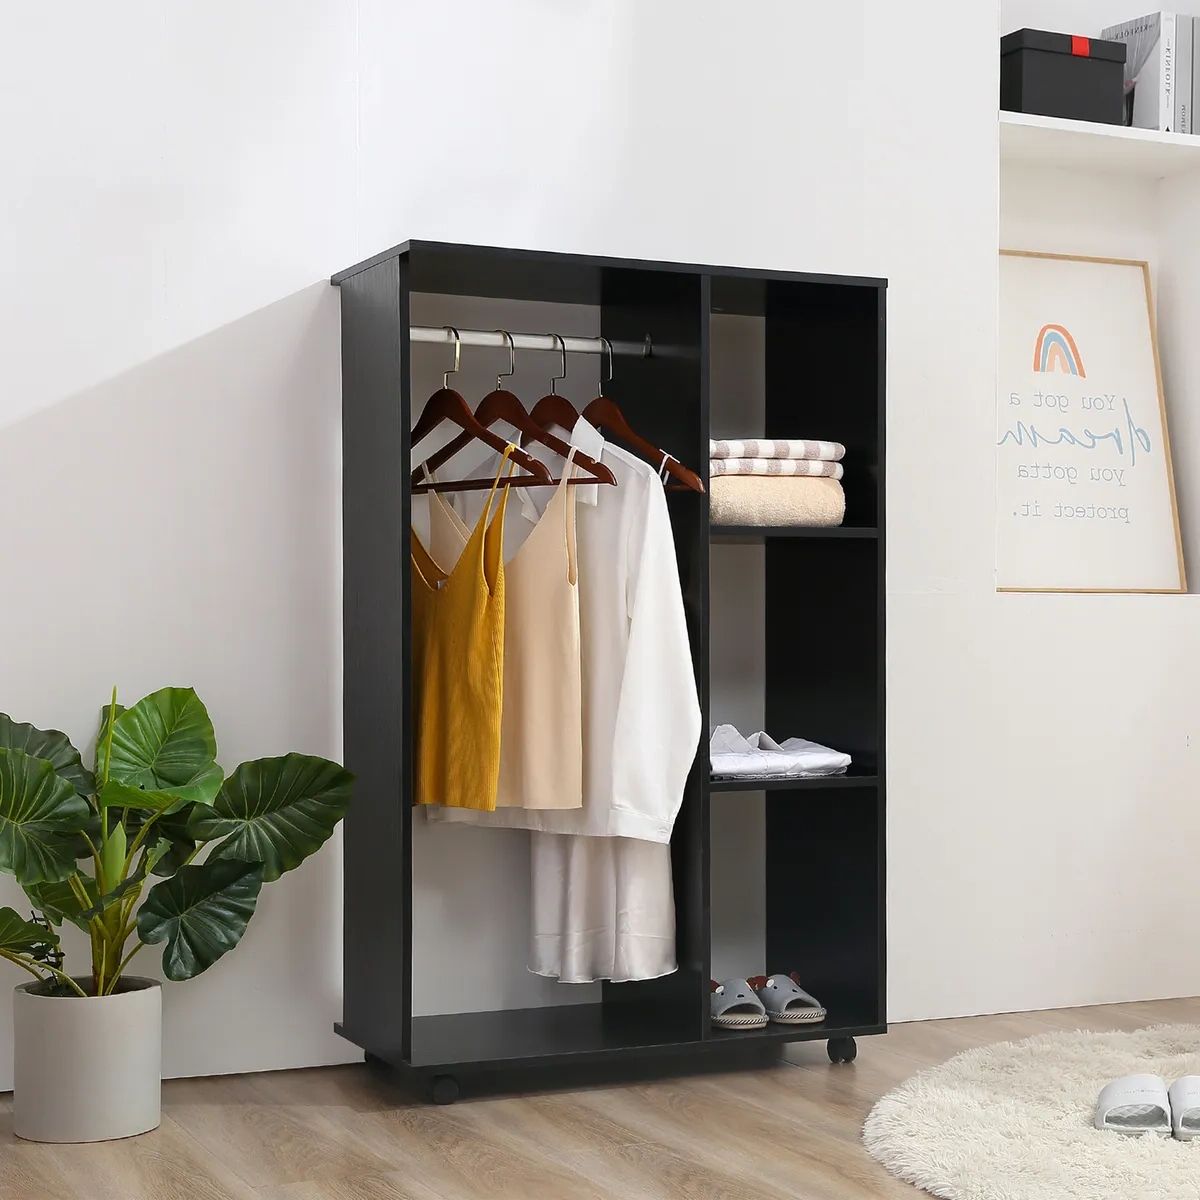 Homcom Rolling Open Wardrobe Hanging Rail Storage Shelves For Clothes, Black  | Ebay Inside Double Black Covered Tidy Rail Wardrobes (View 17 of 20)